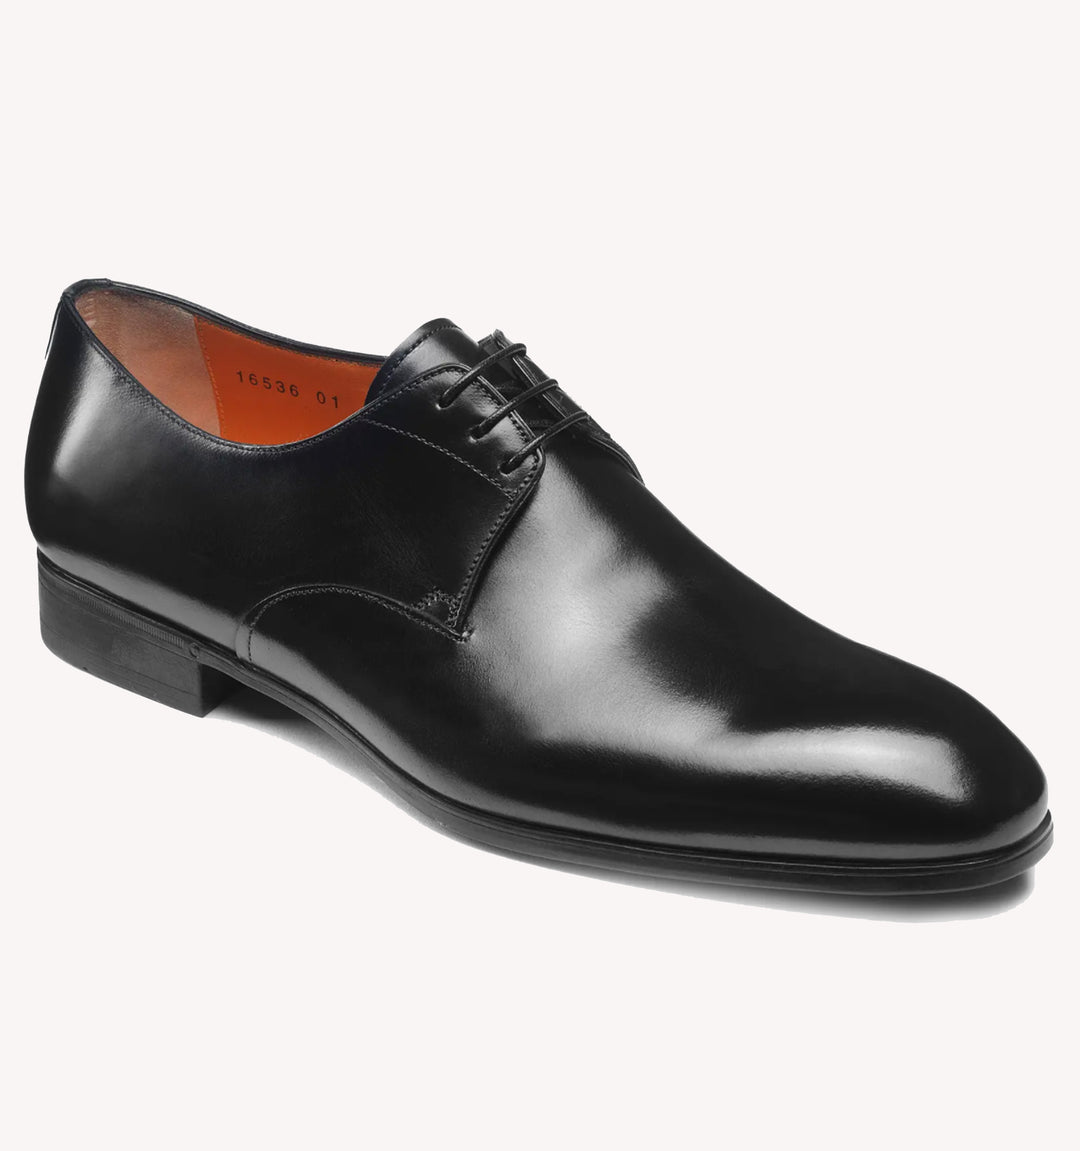 Santoni Induct Lace-up Shoe in Black